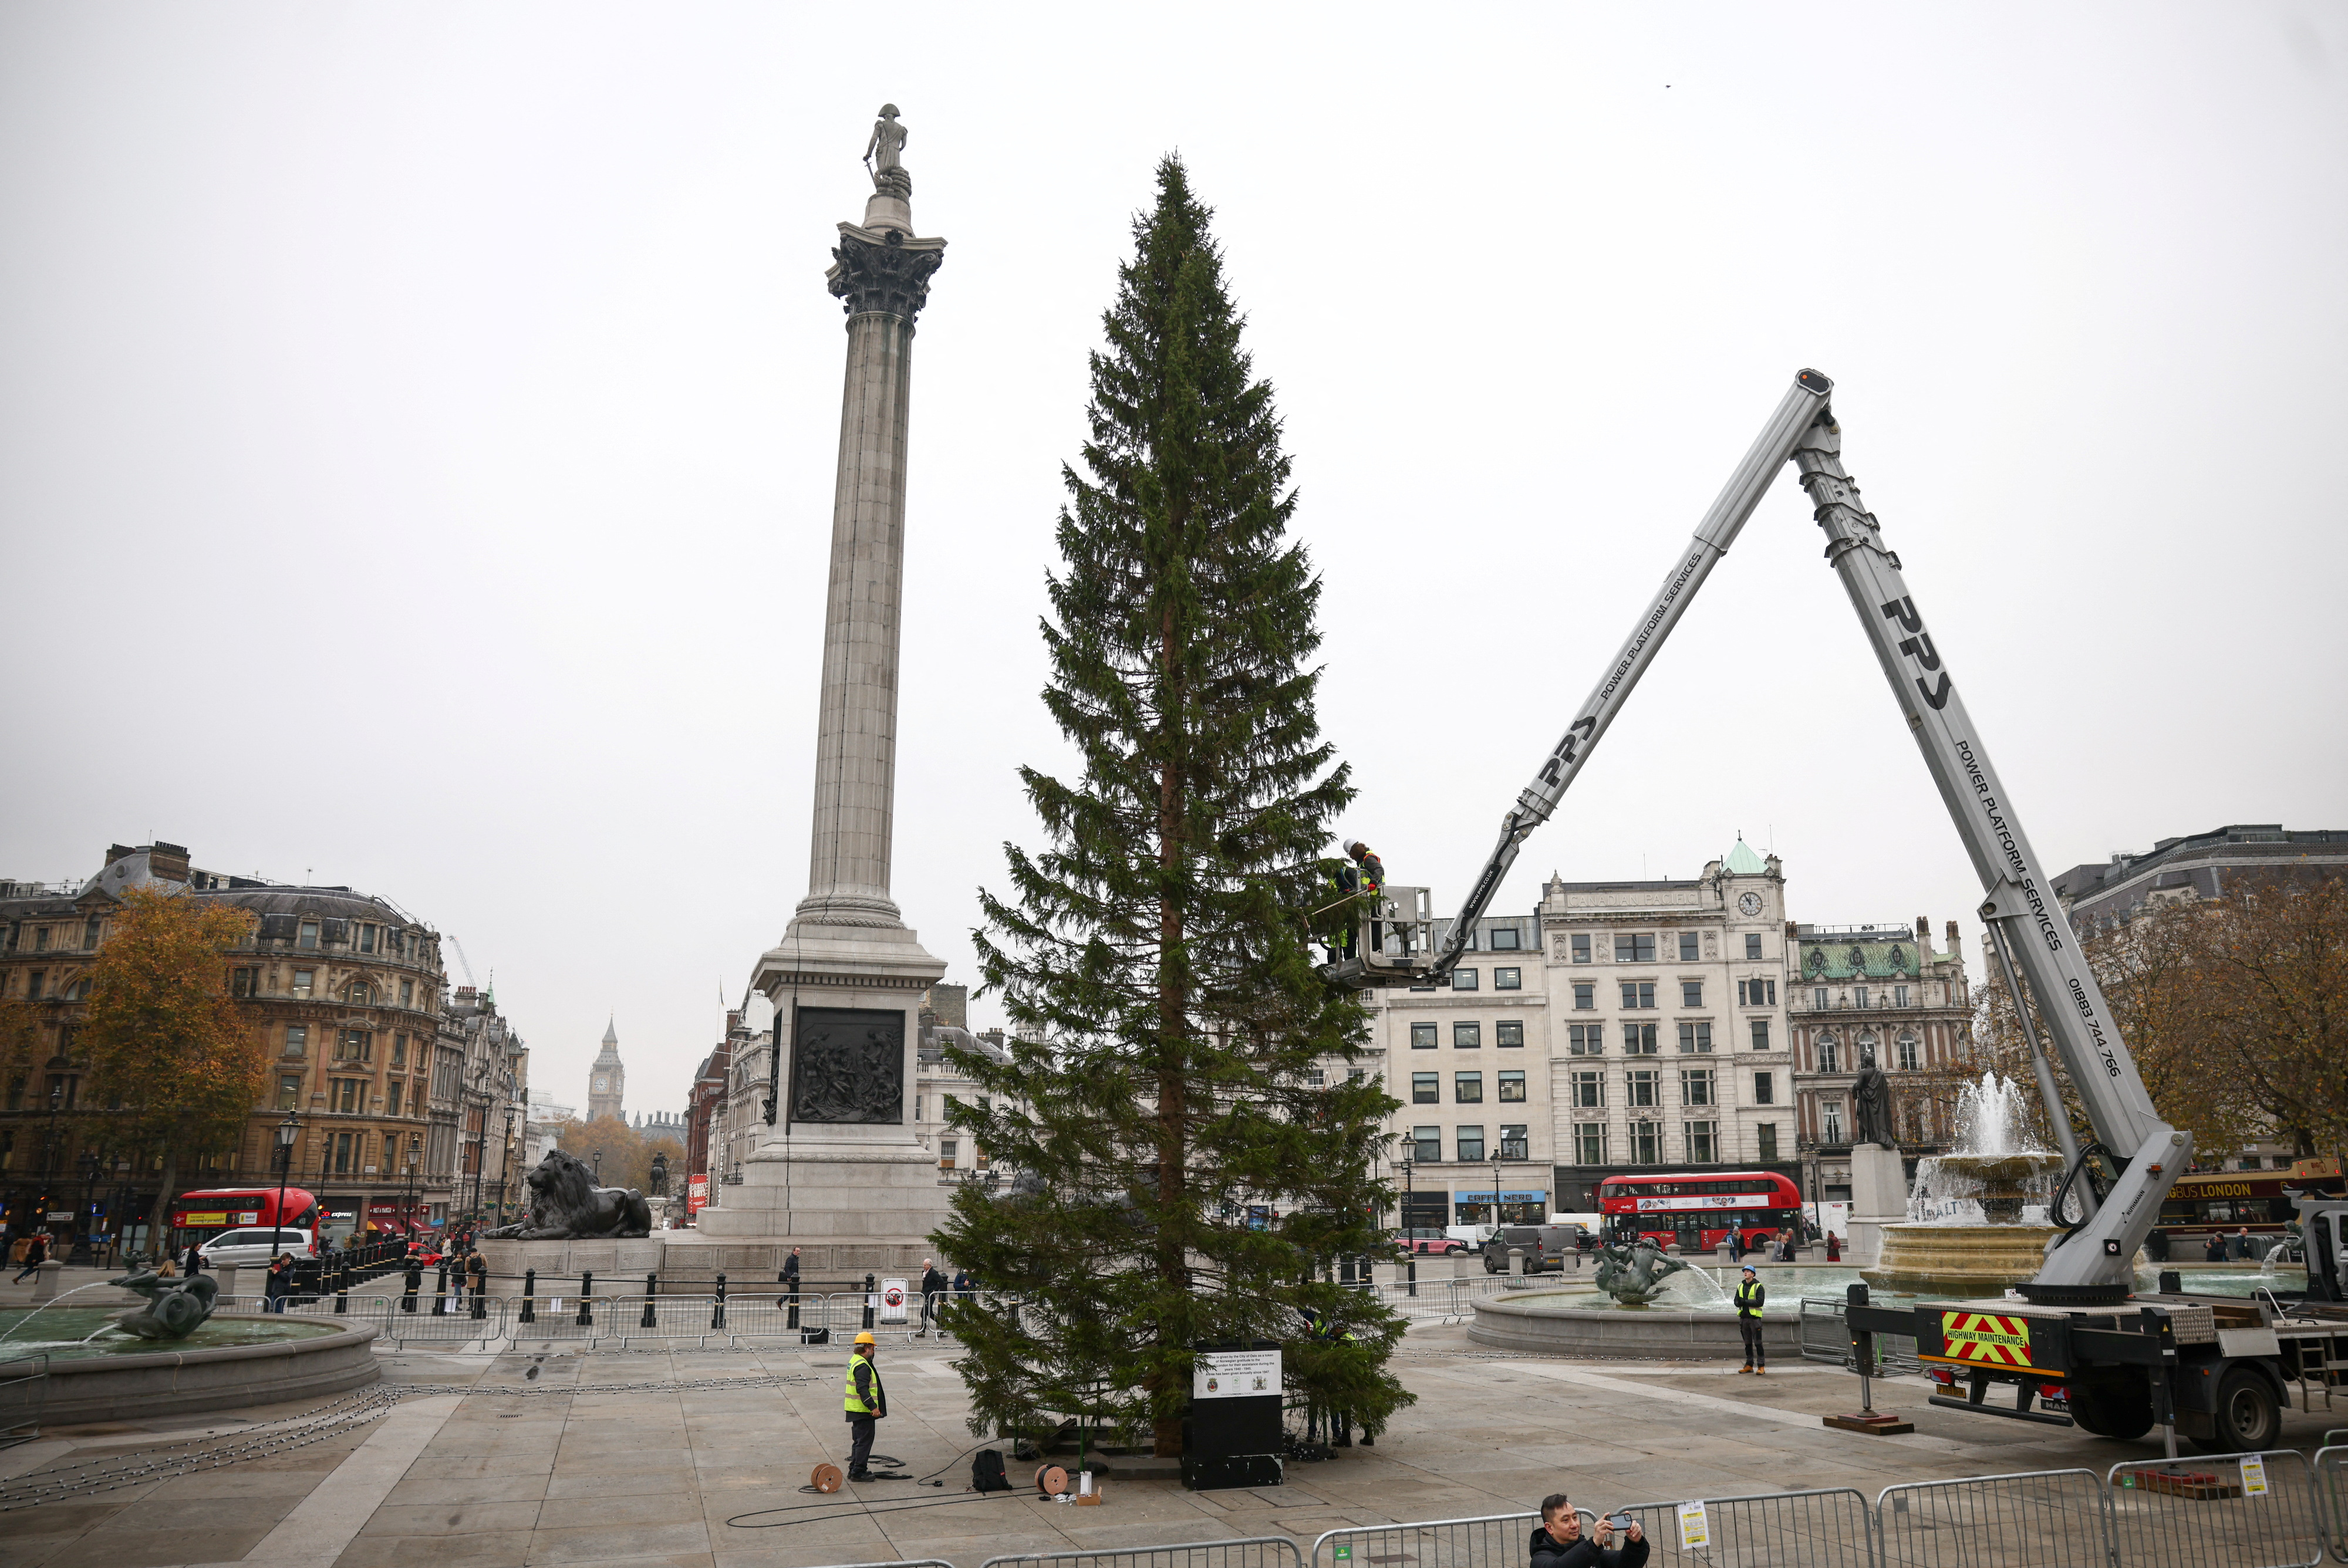 Workers place lights on the Christmas tree in Trafalgar Square in London, Britain, November 29, 2022. Image credit: Reuters